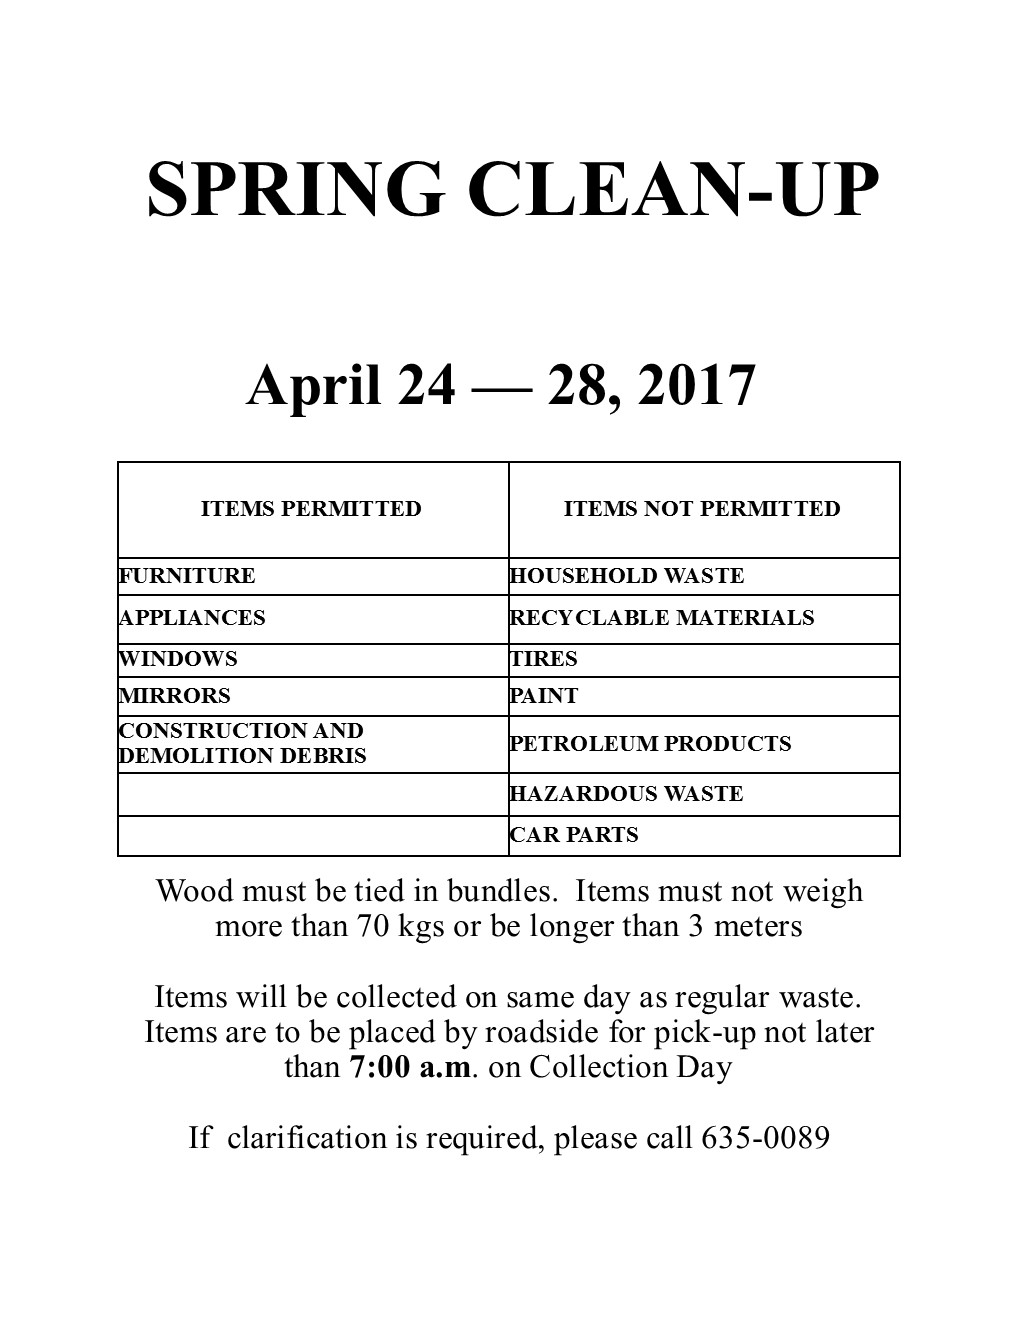 SpringCleanUp17